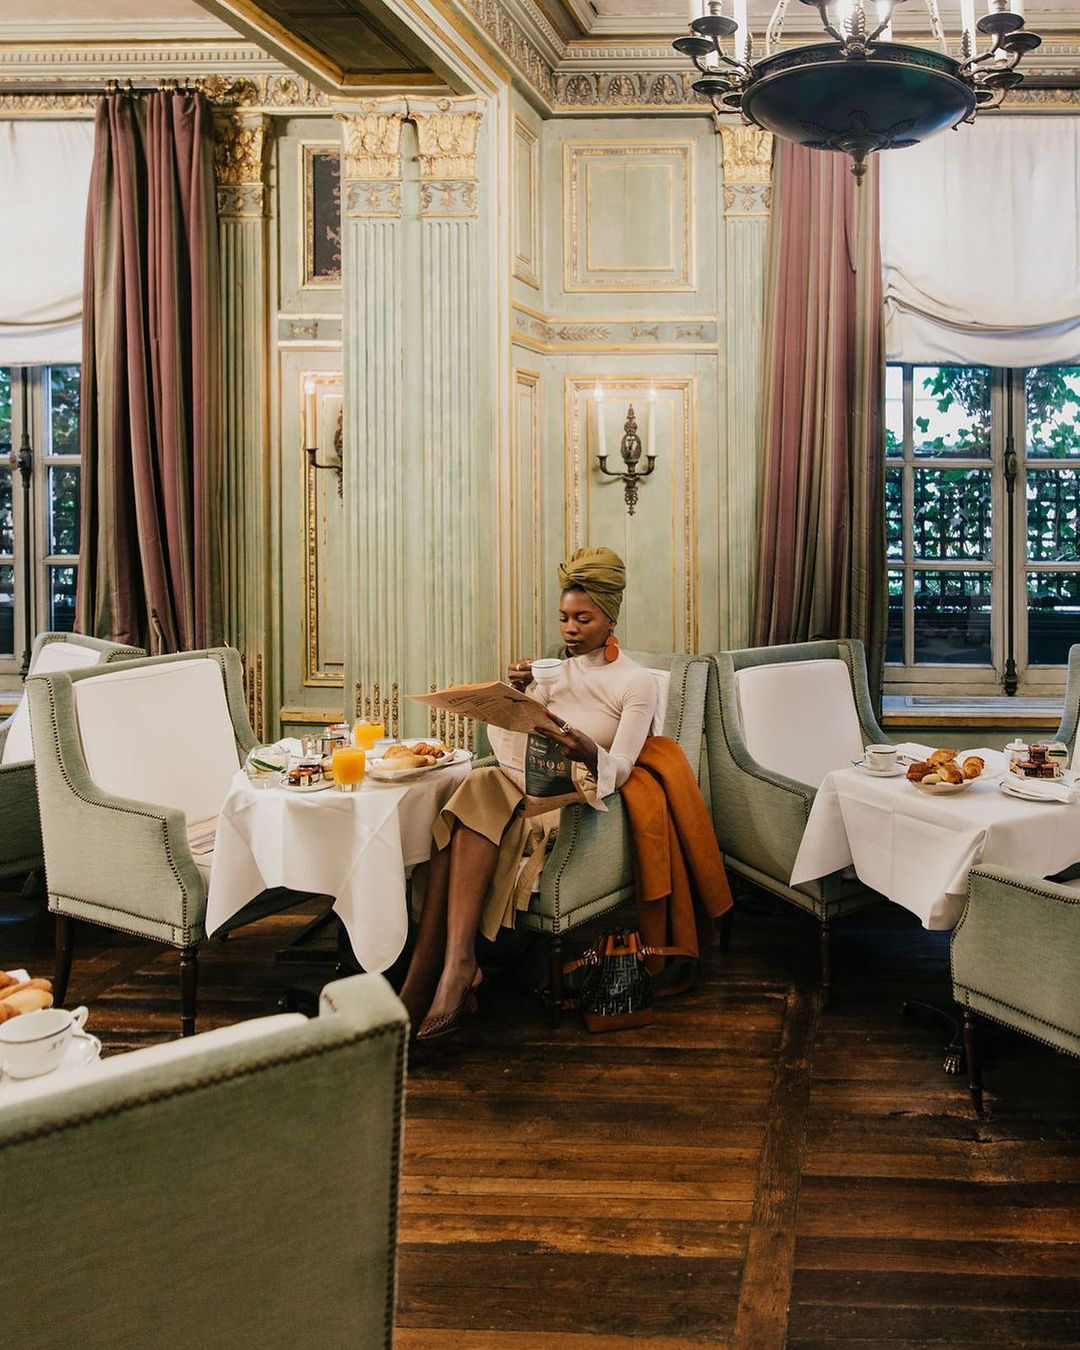 The Belle Epoque style Champagne Bar at Le Dokhan's in Paris with  velvet green chairs, dusty pink drapes and original sage + gold moldings along the walls